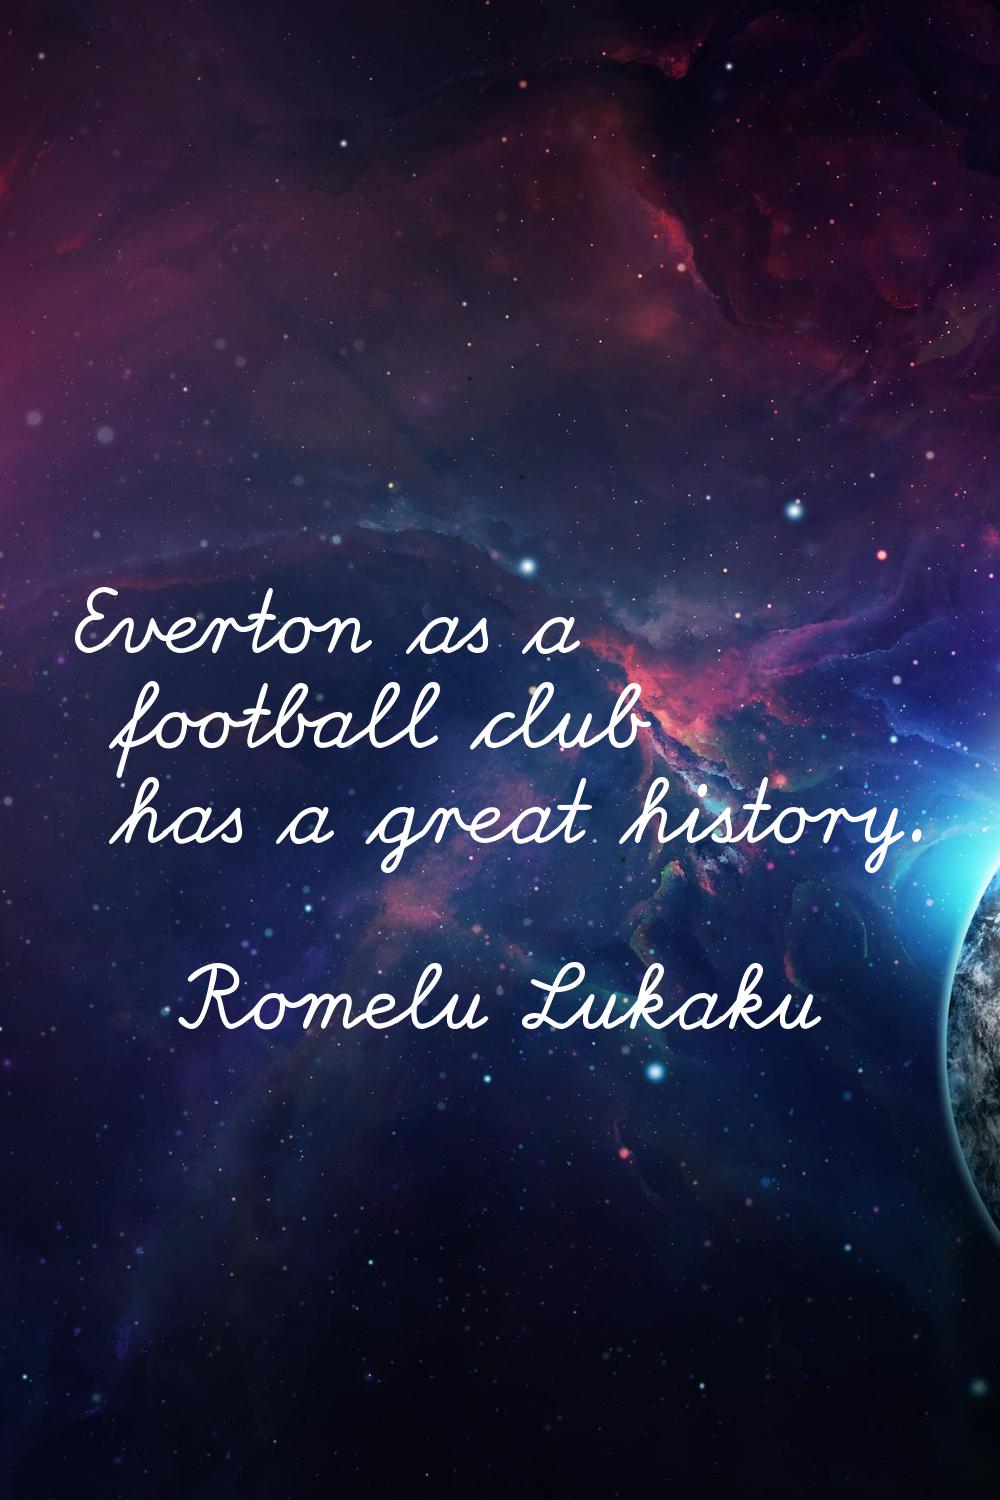 Everton as a football club has a great history.